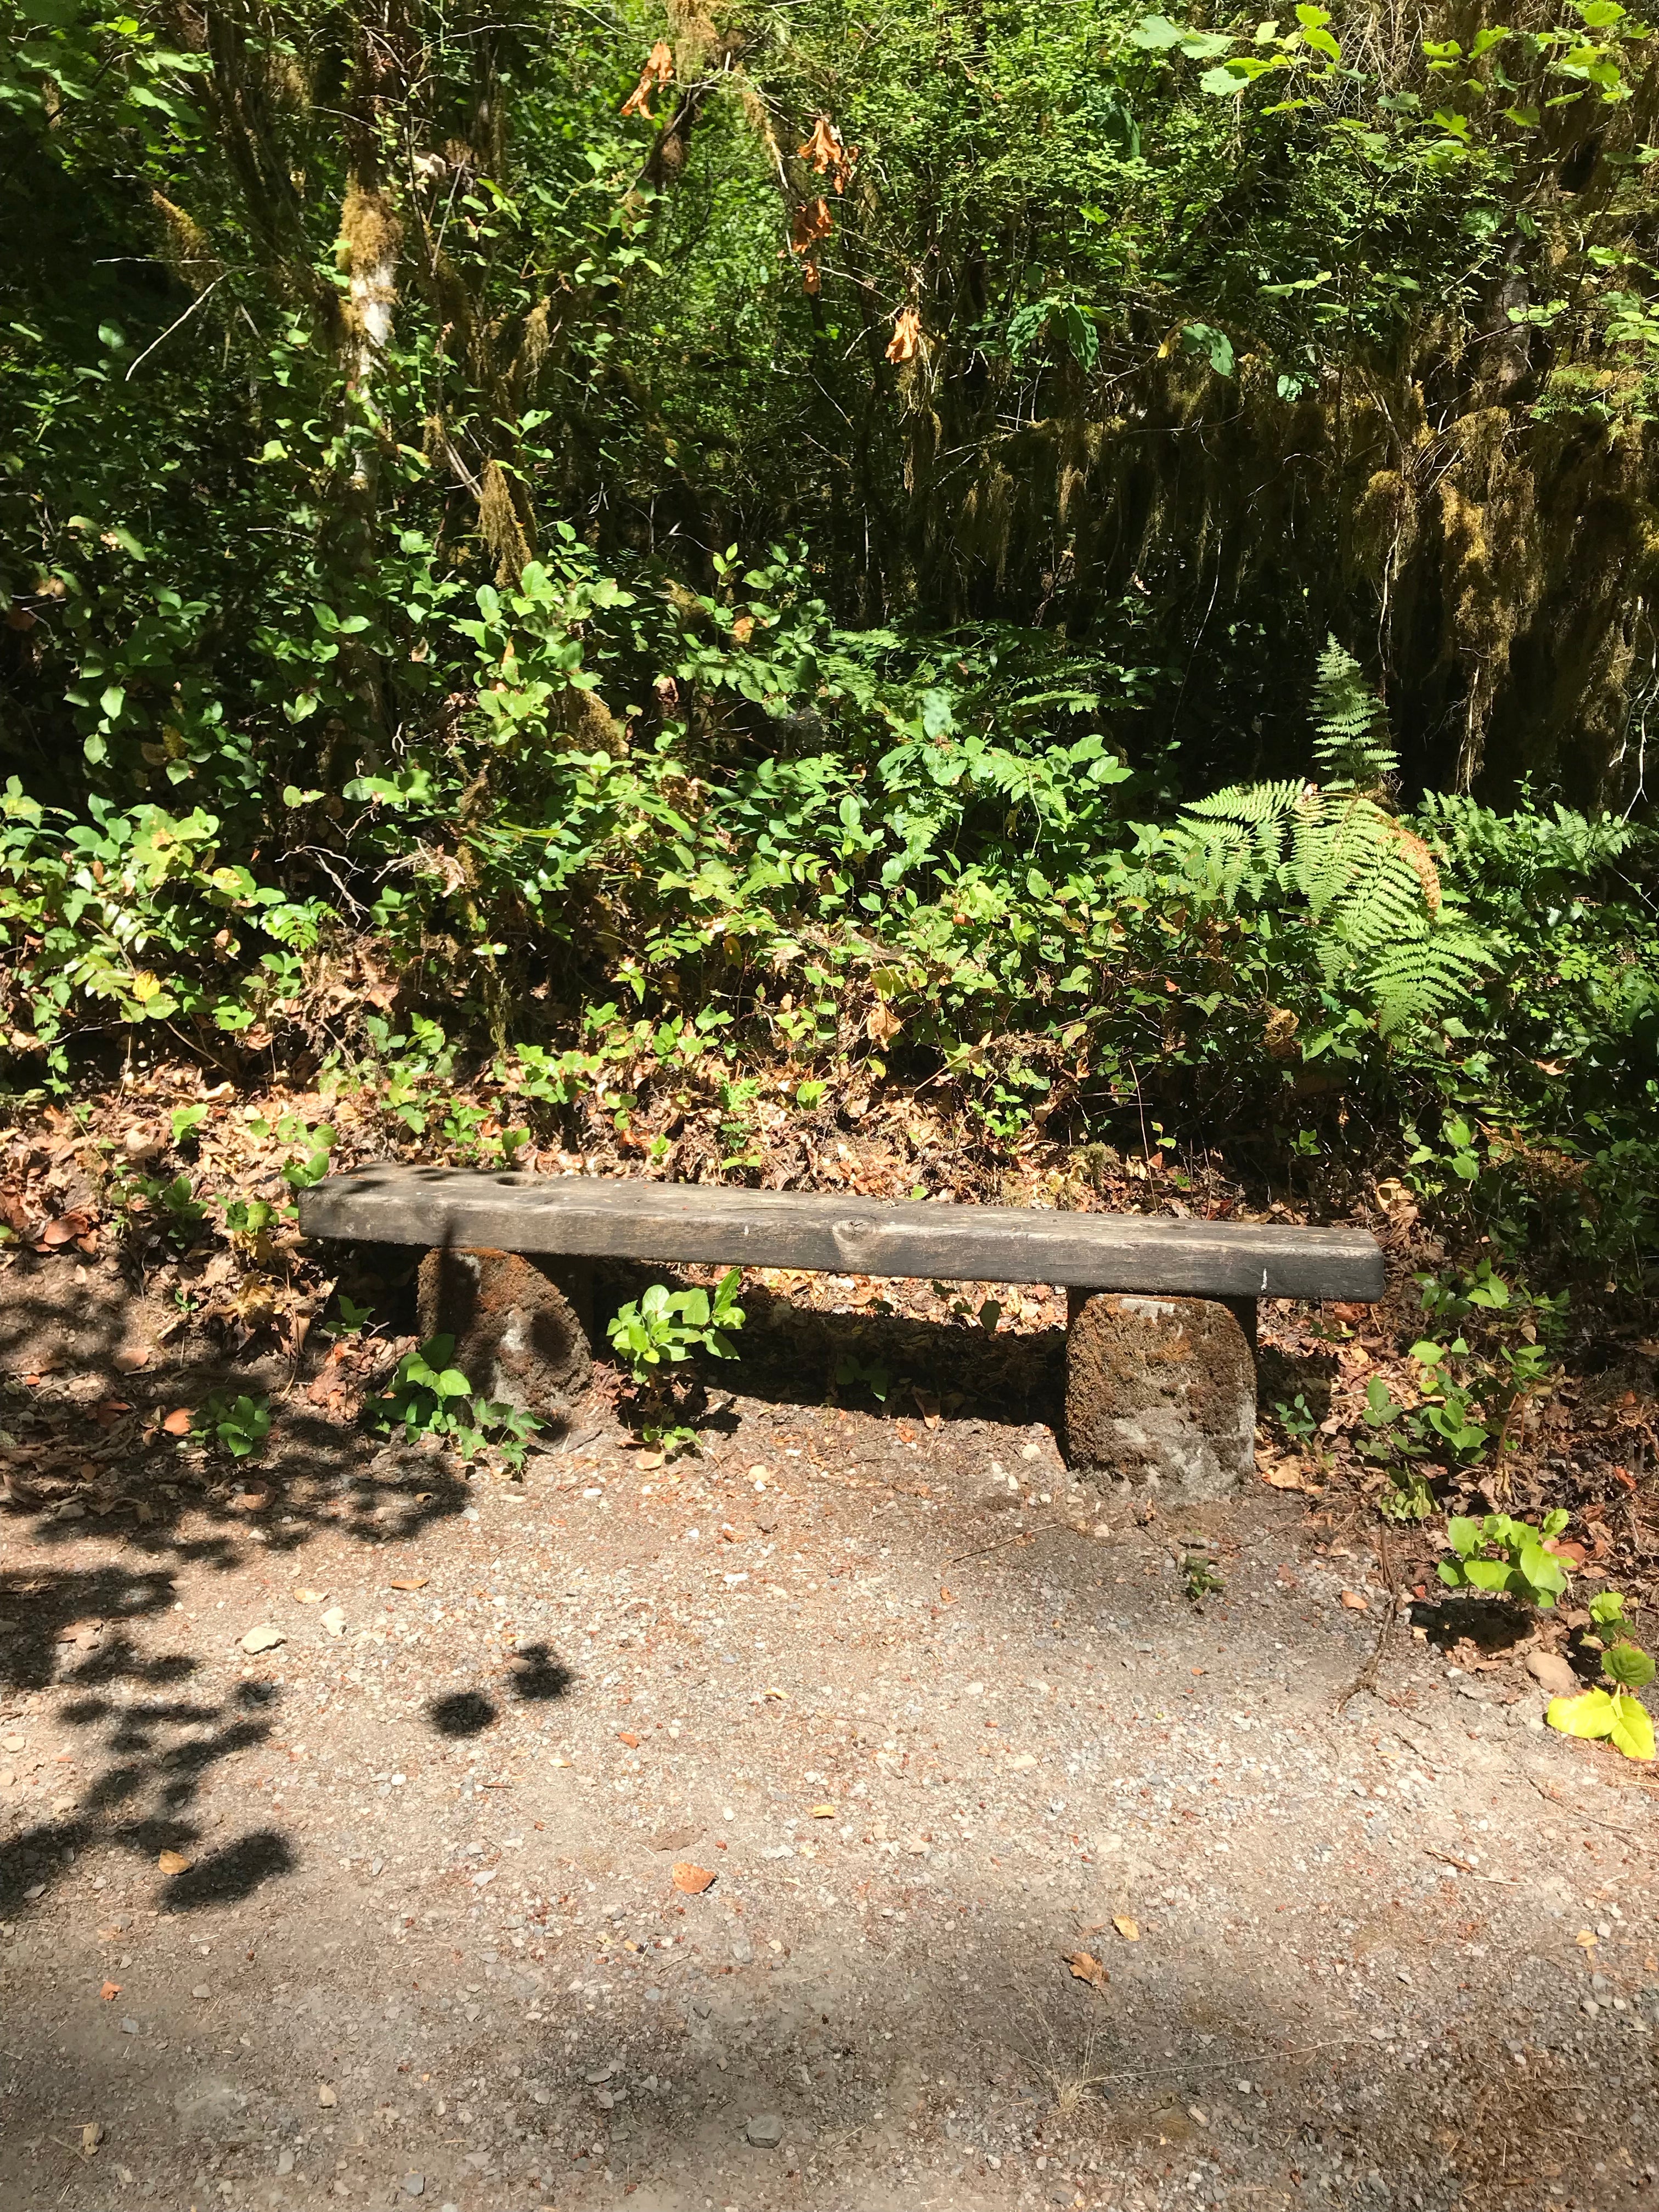 Benches to rest on Walton Ranch trail